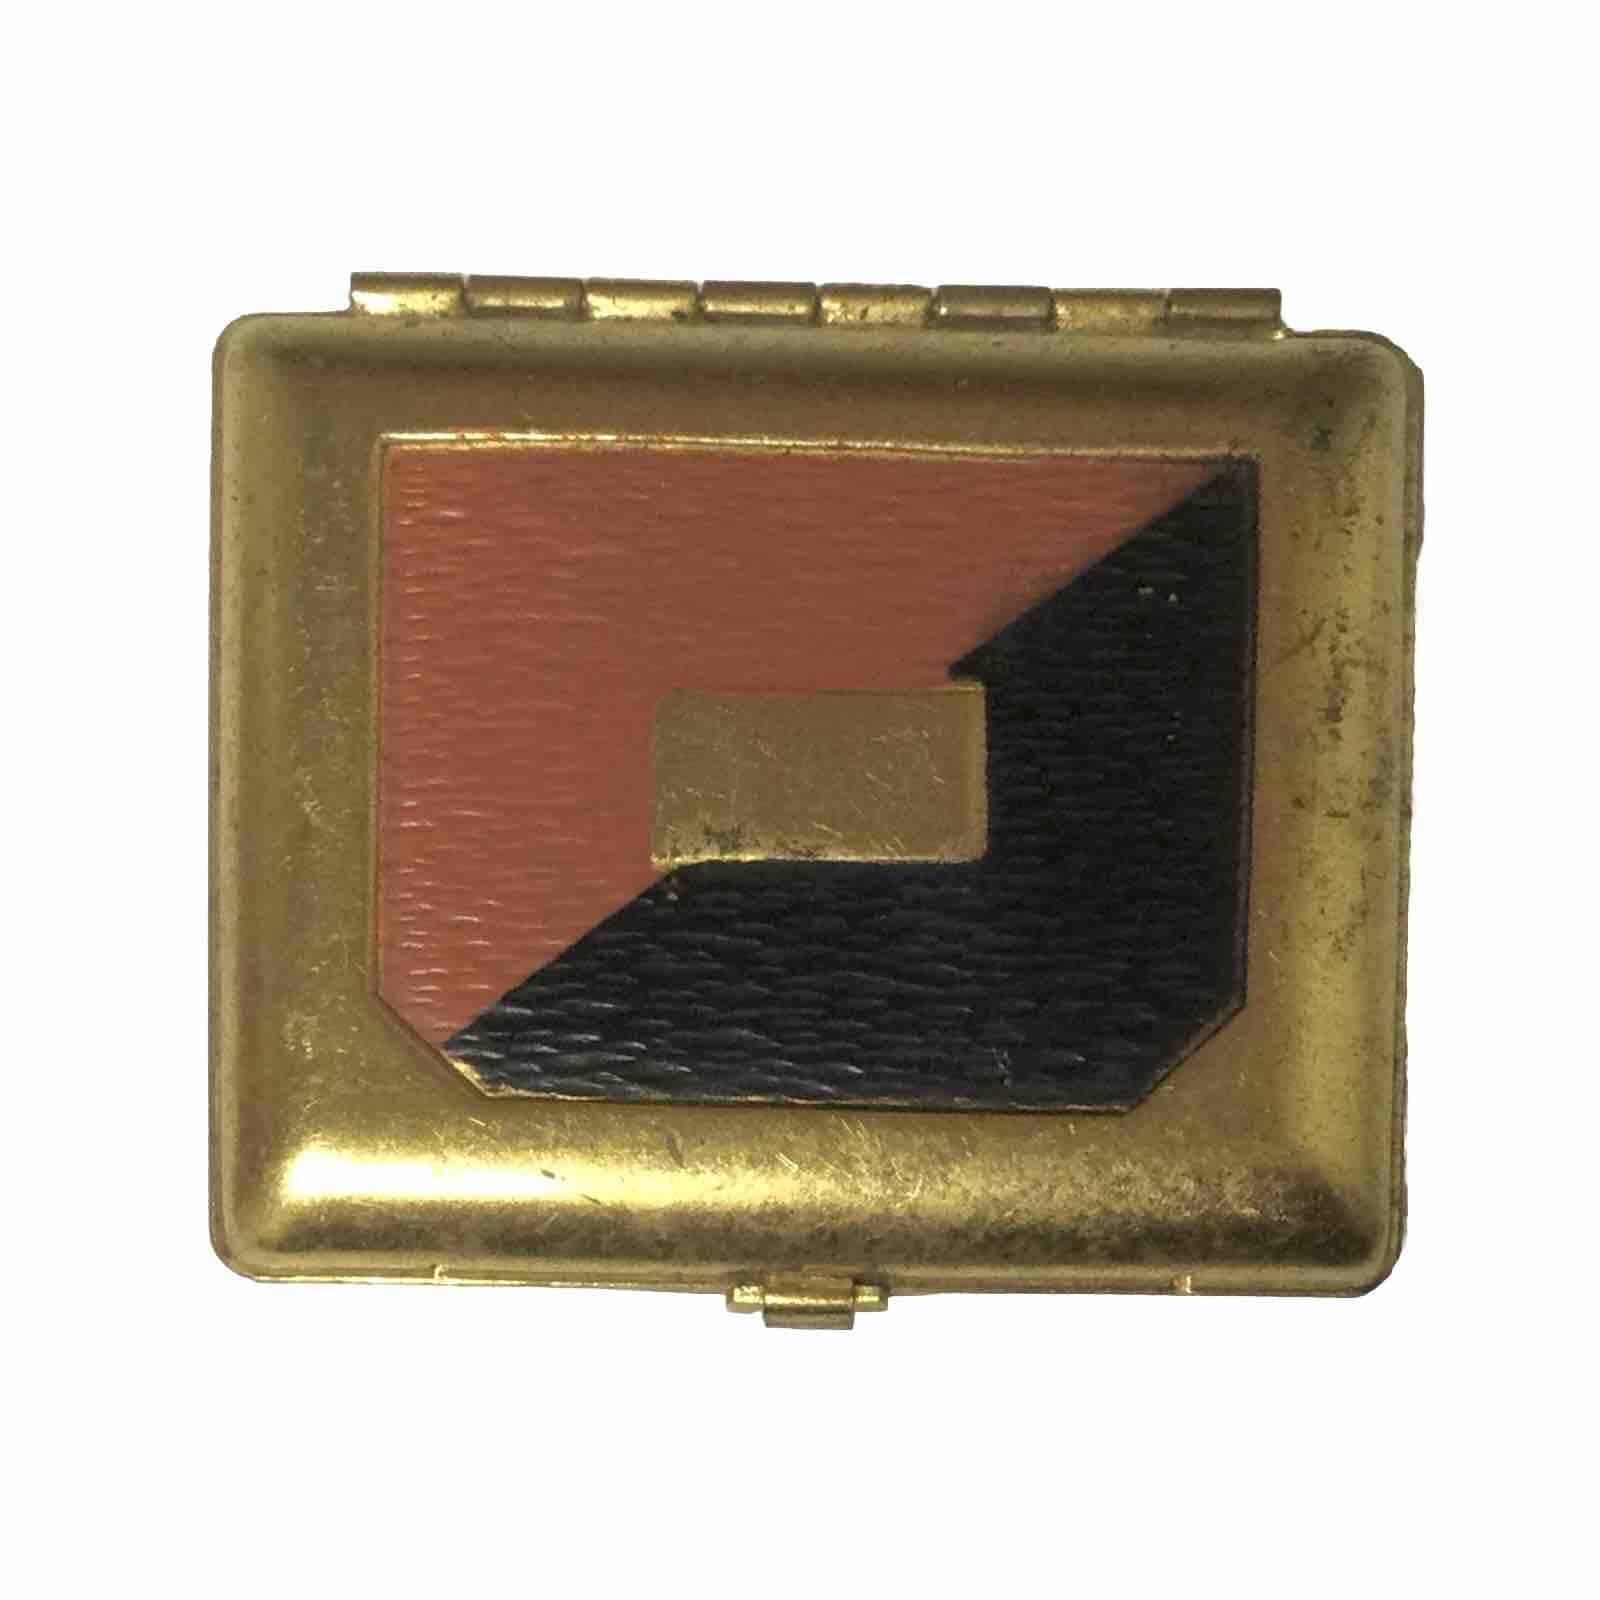 Early Small Powder Compact Red Black Enamel 1920s